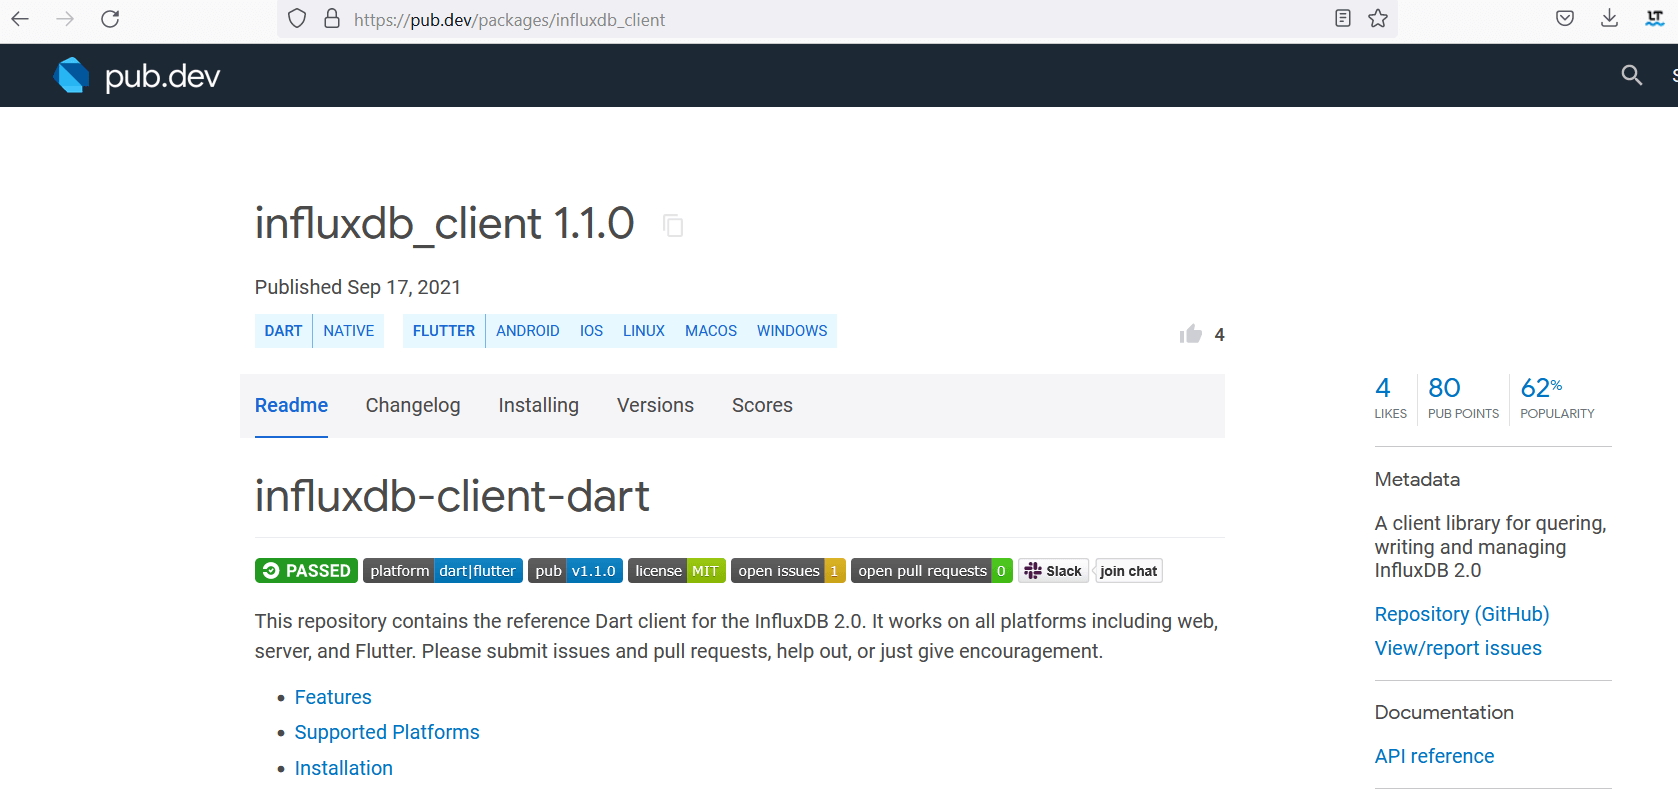 InfluxDB client library download page